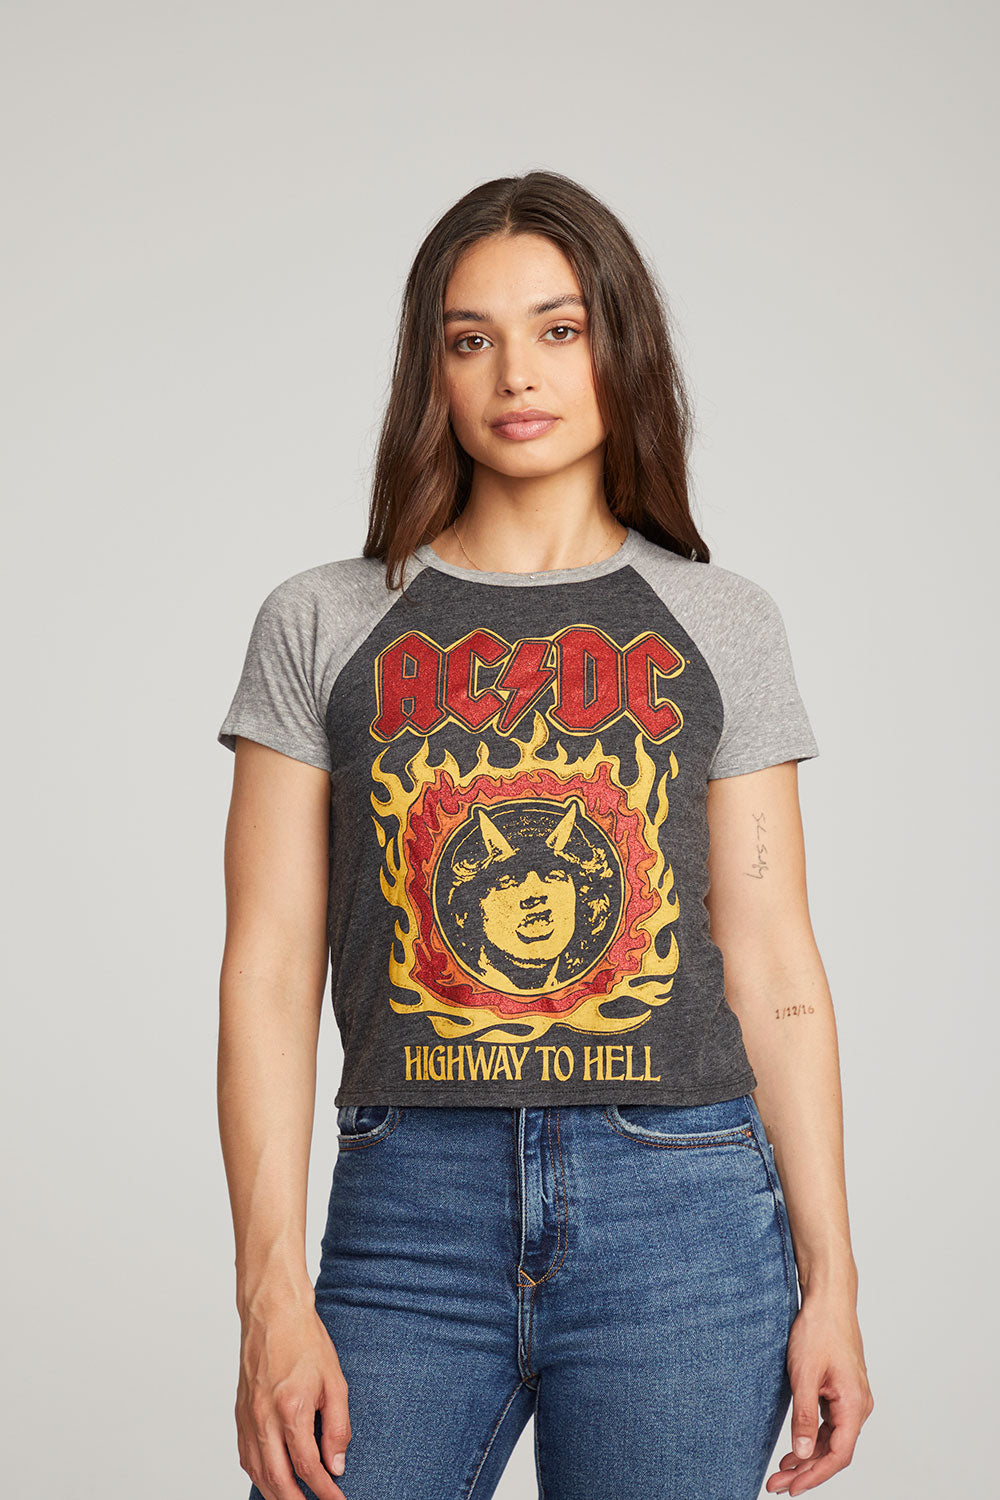 AC/DC Highway To Hell Tee WOMENS chaserbrand